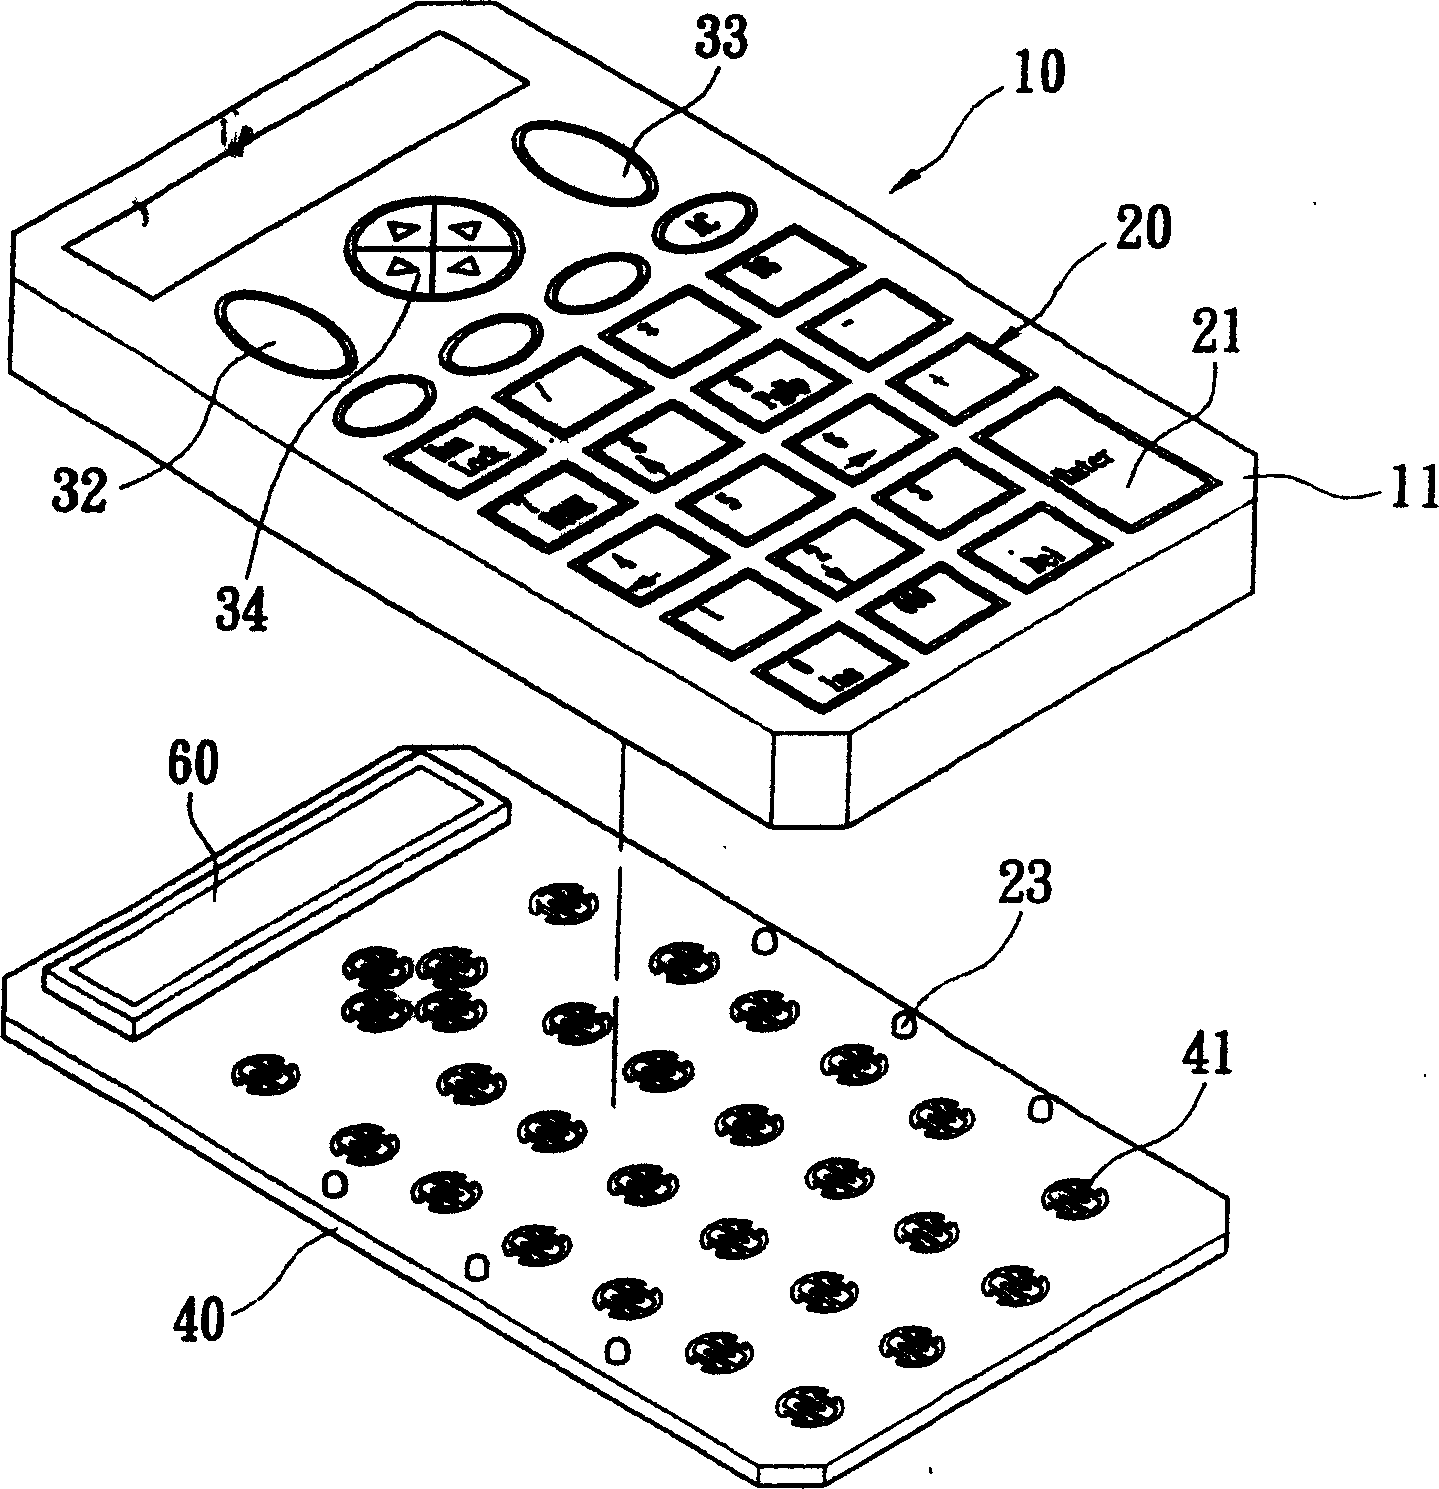 Digit keyboard possessing structure of mouse